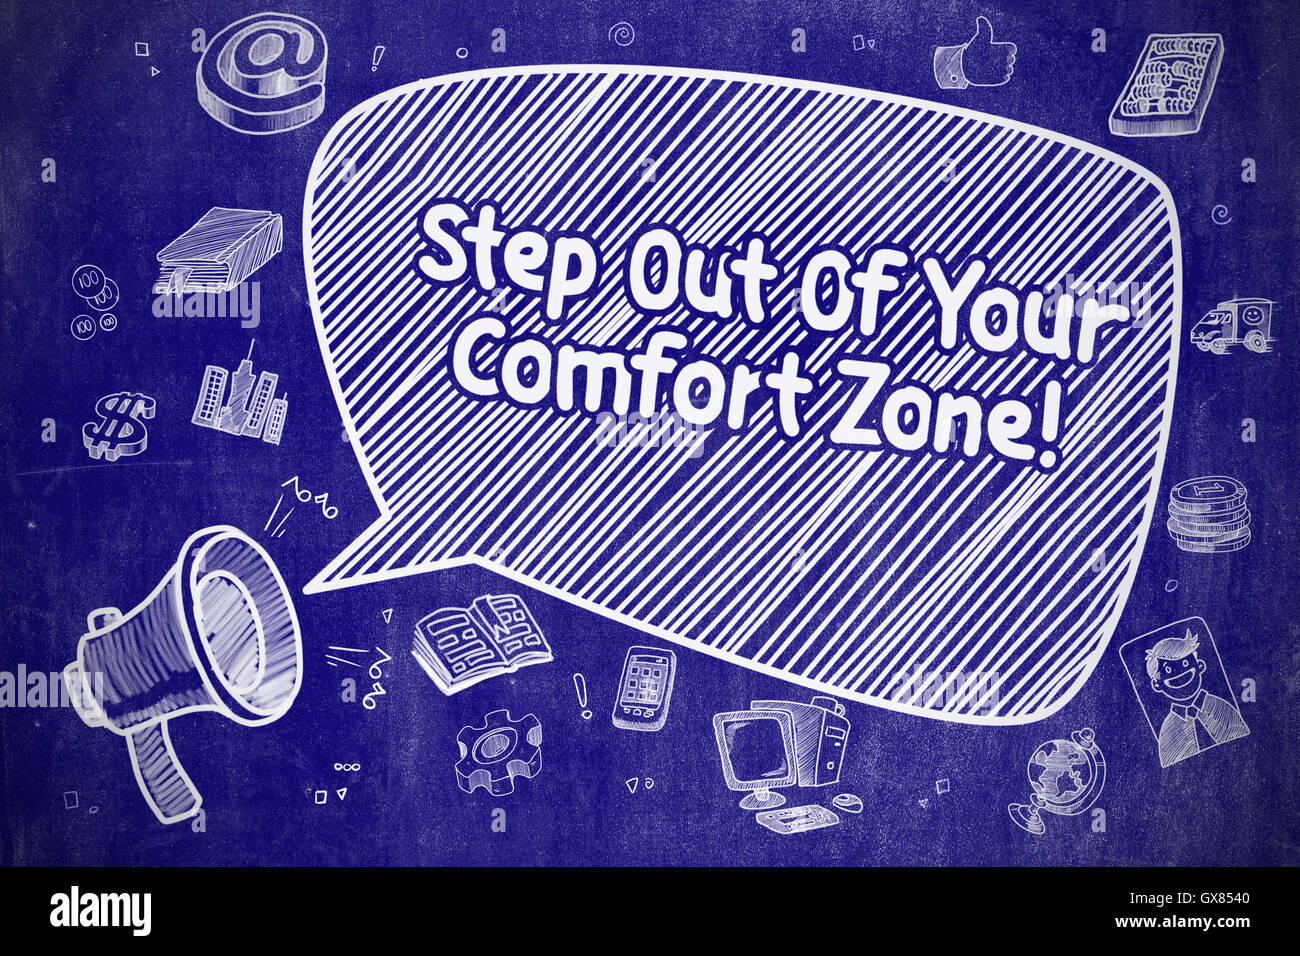 Step Out Of Your Comfort Zone - Business Concept. Stock Photo